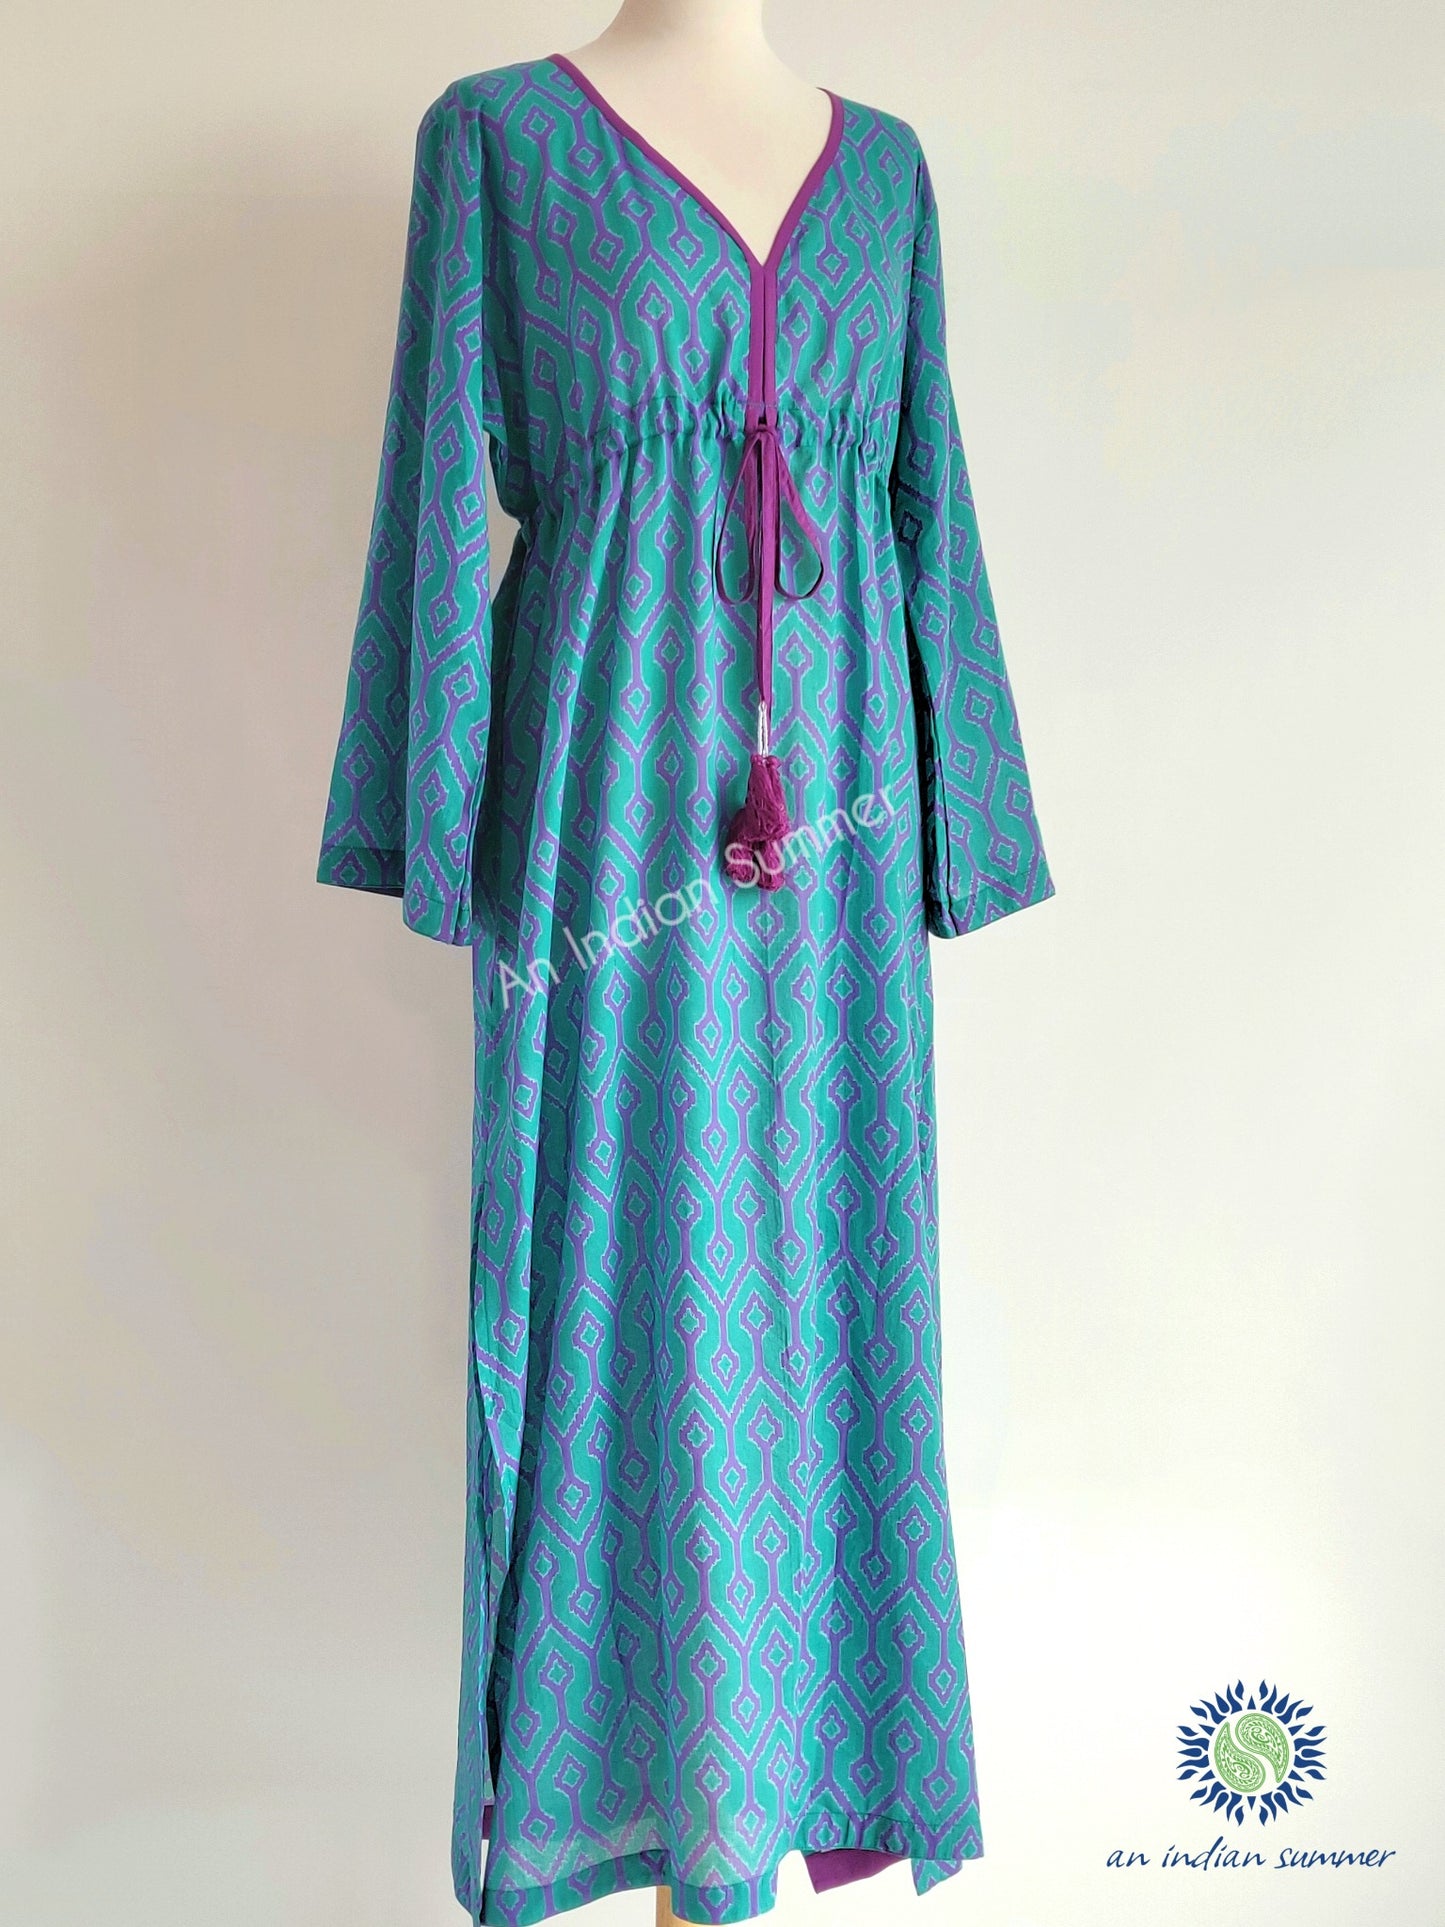 Santorini Maxi Dress | Teal with Purple Contrast Detail | Hand Block Printed | Cotton Voile | An Indian Summer | Seasonless Timeless Sustainable Ethical Authentic Artisan Conscious Clothing Lifestyle Brand